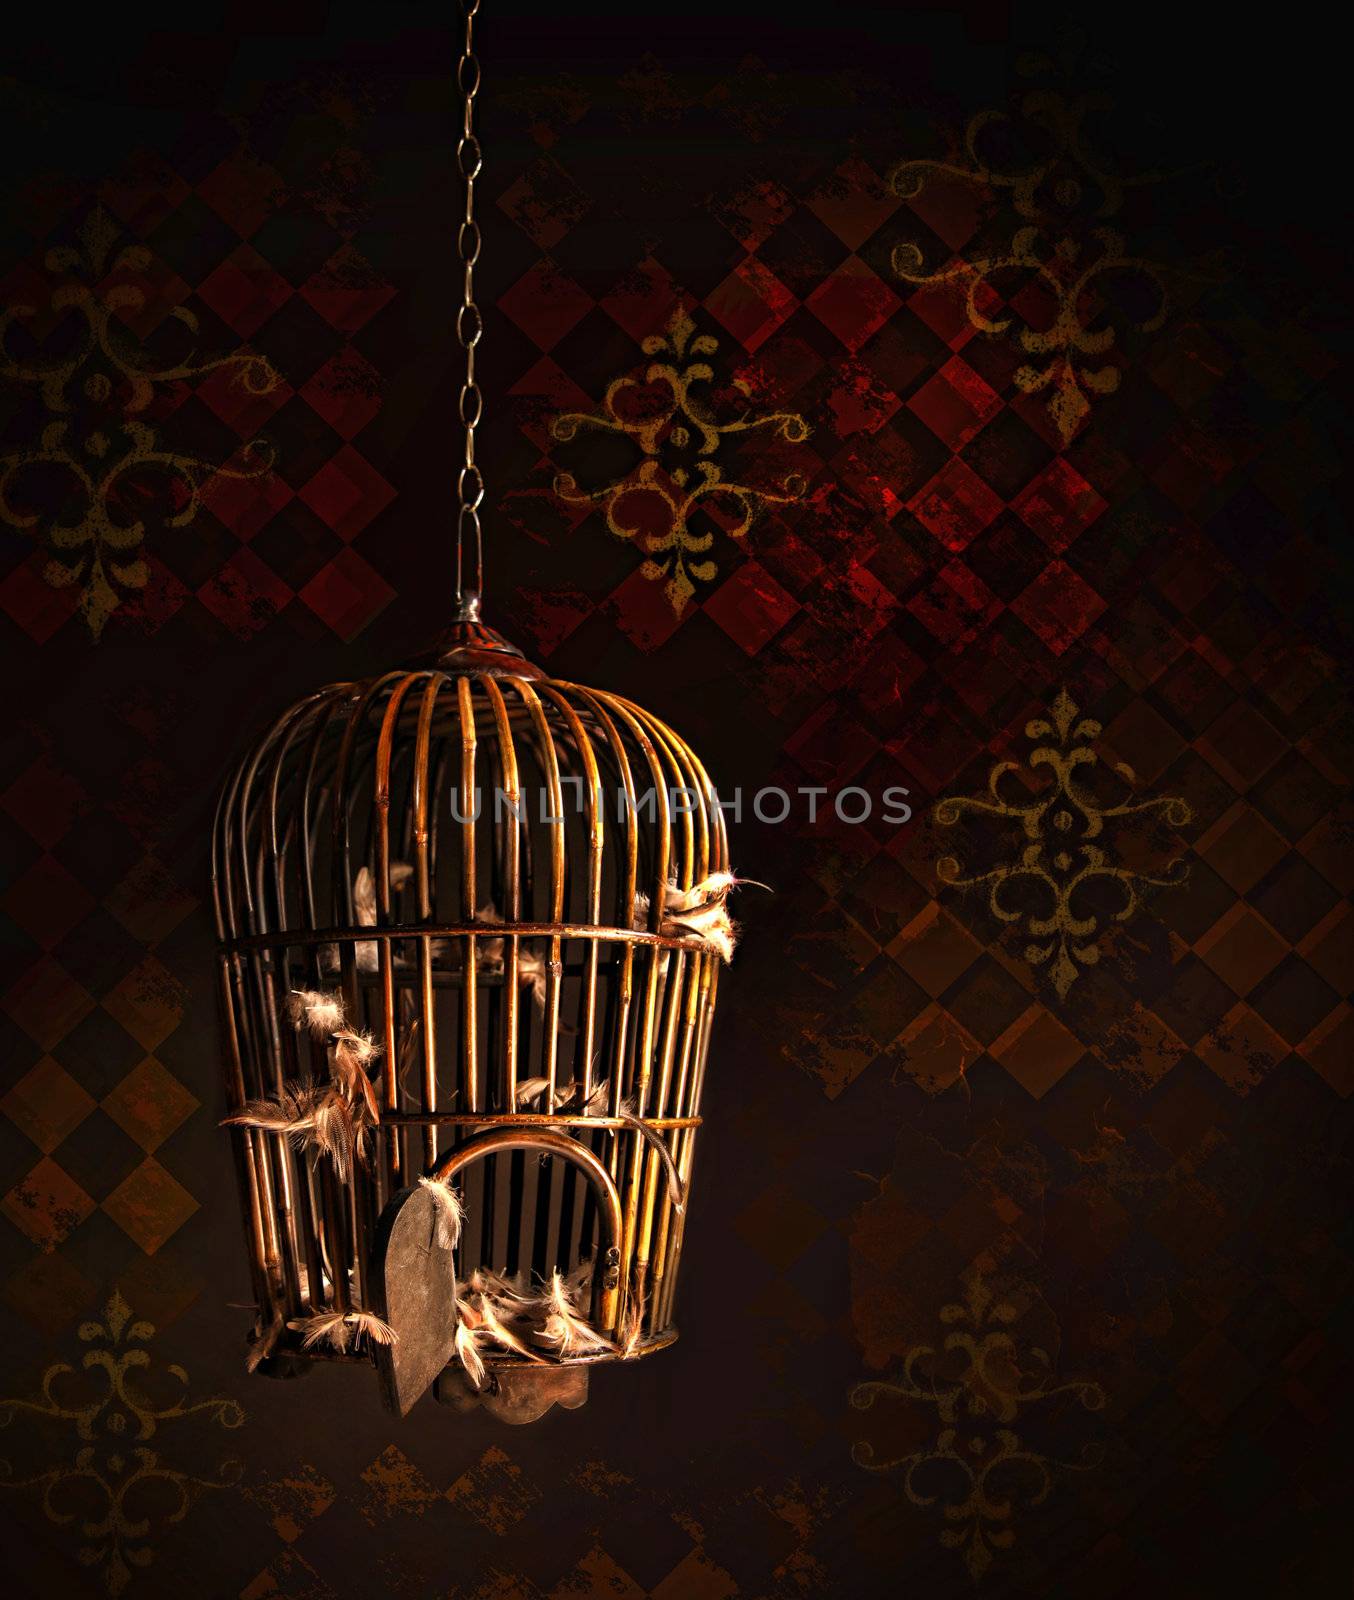 Old wooden bird cage with nothing but feathers left inside